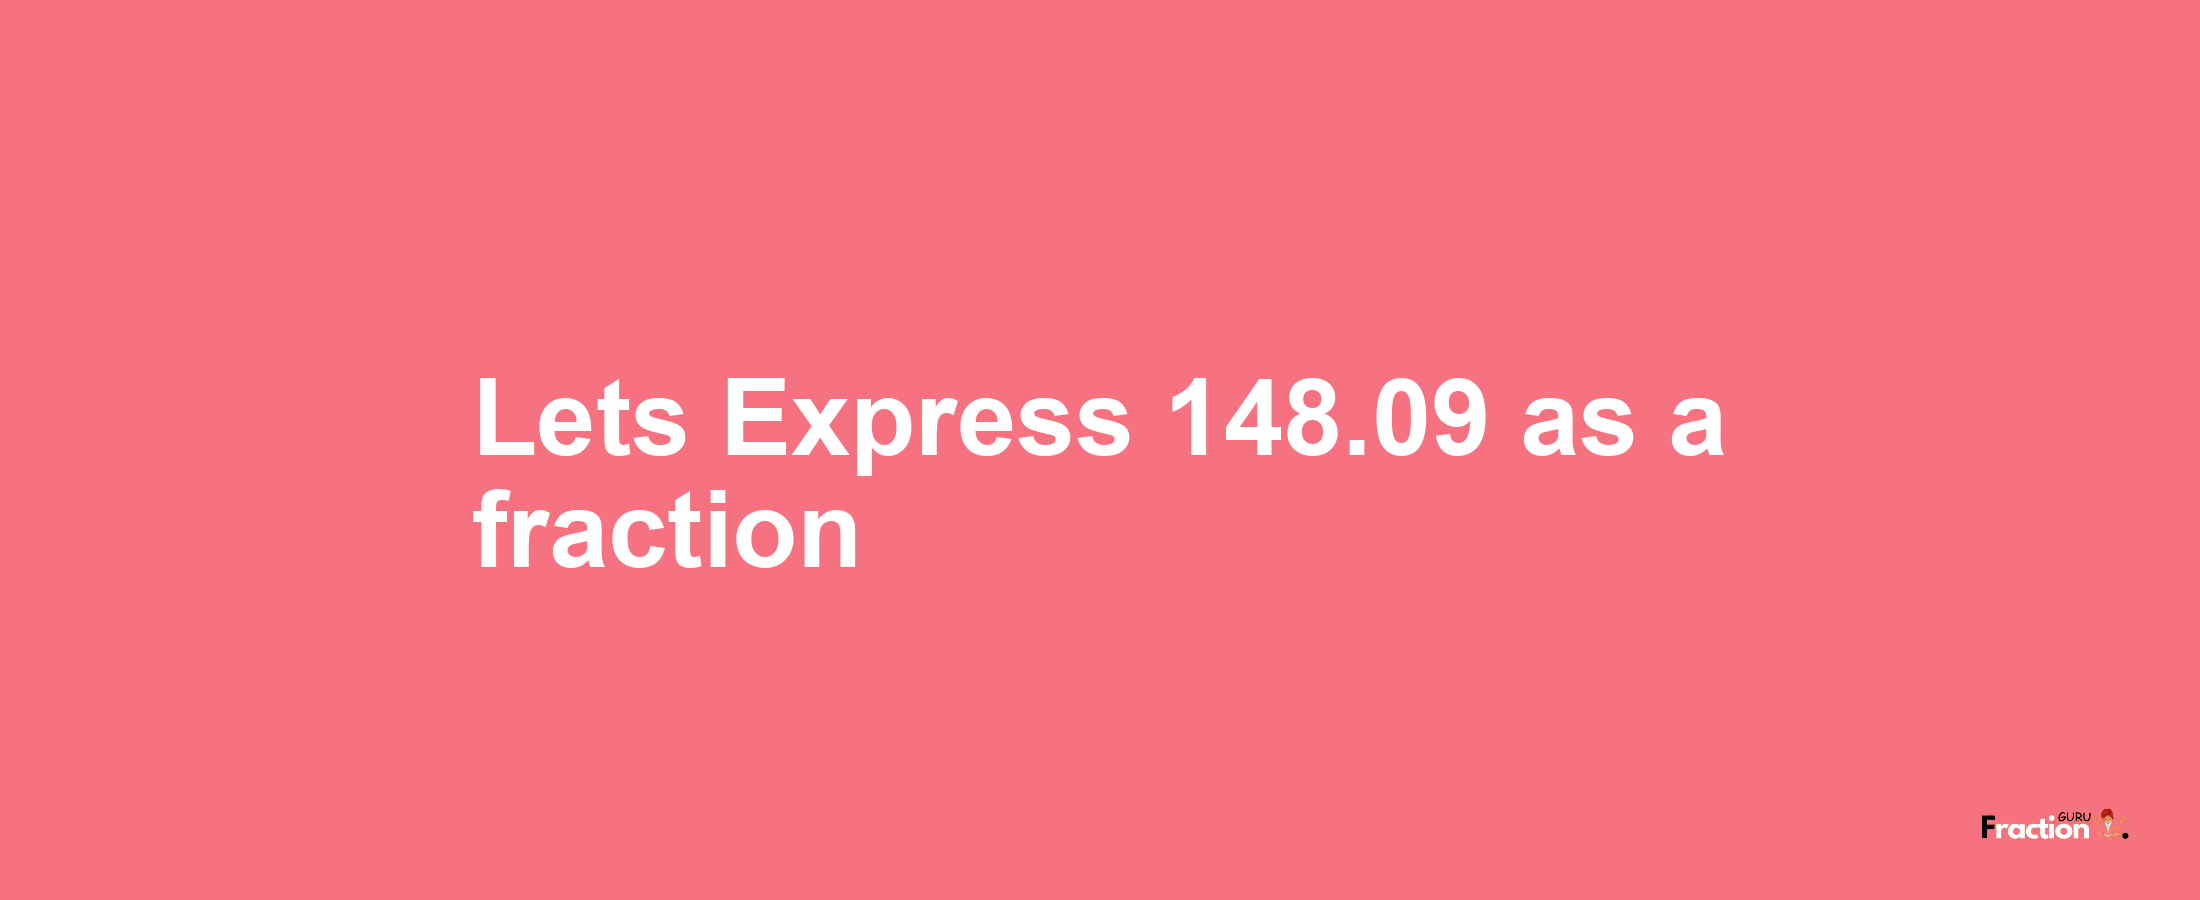 Lets Express 148.09 as afraction